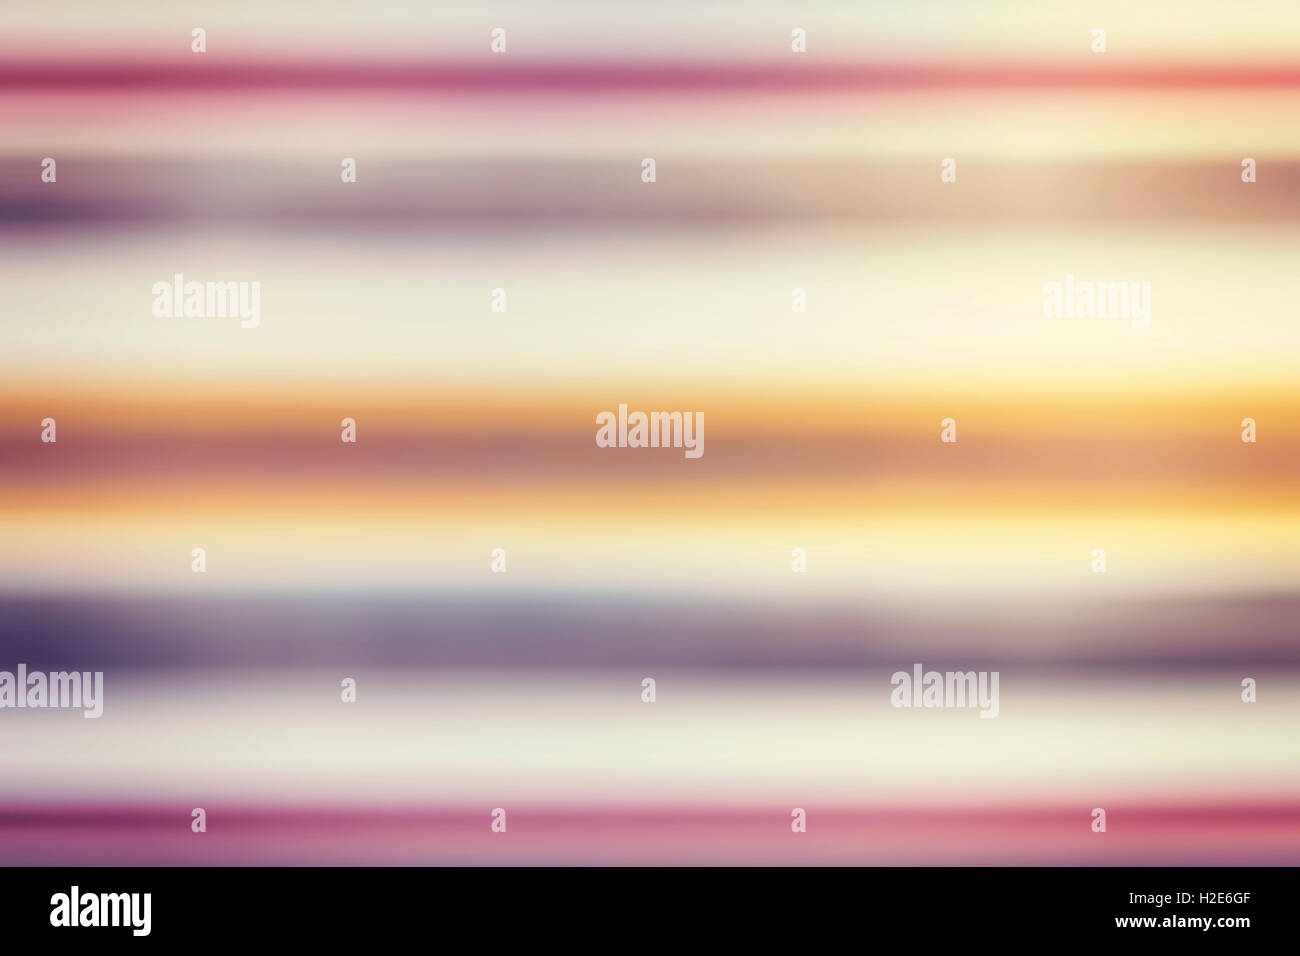 Blurred photo of colorful lines, abstract background. Stock Photo